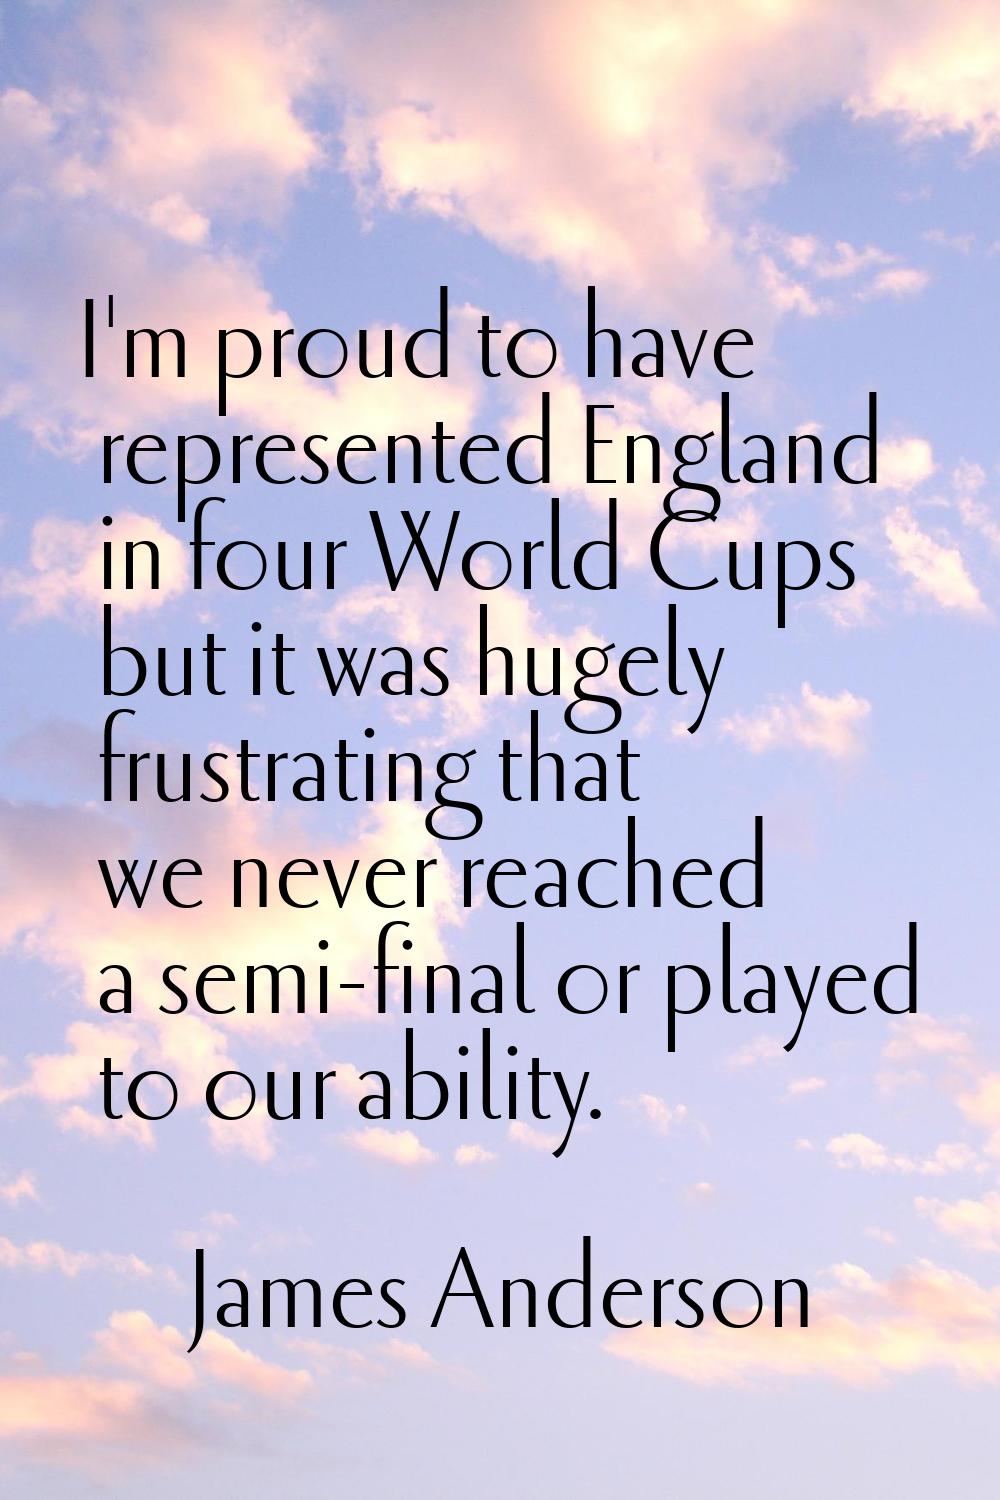 I'm proud to have represented England in four World Cups but it was hugely frustrating that we neve